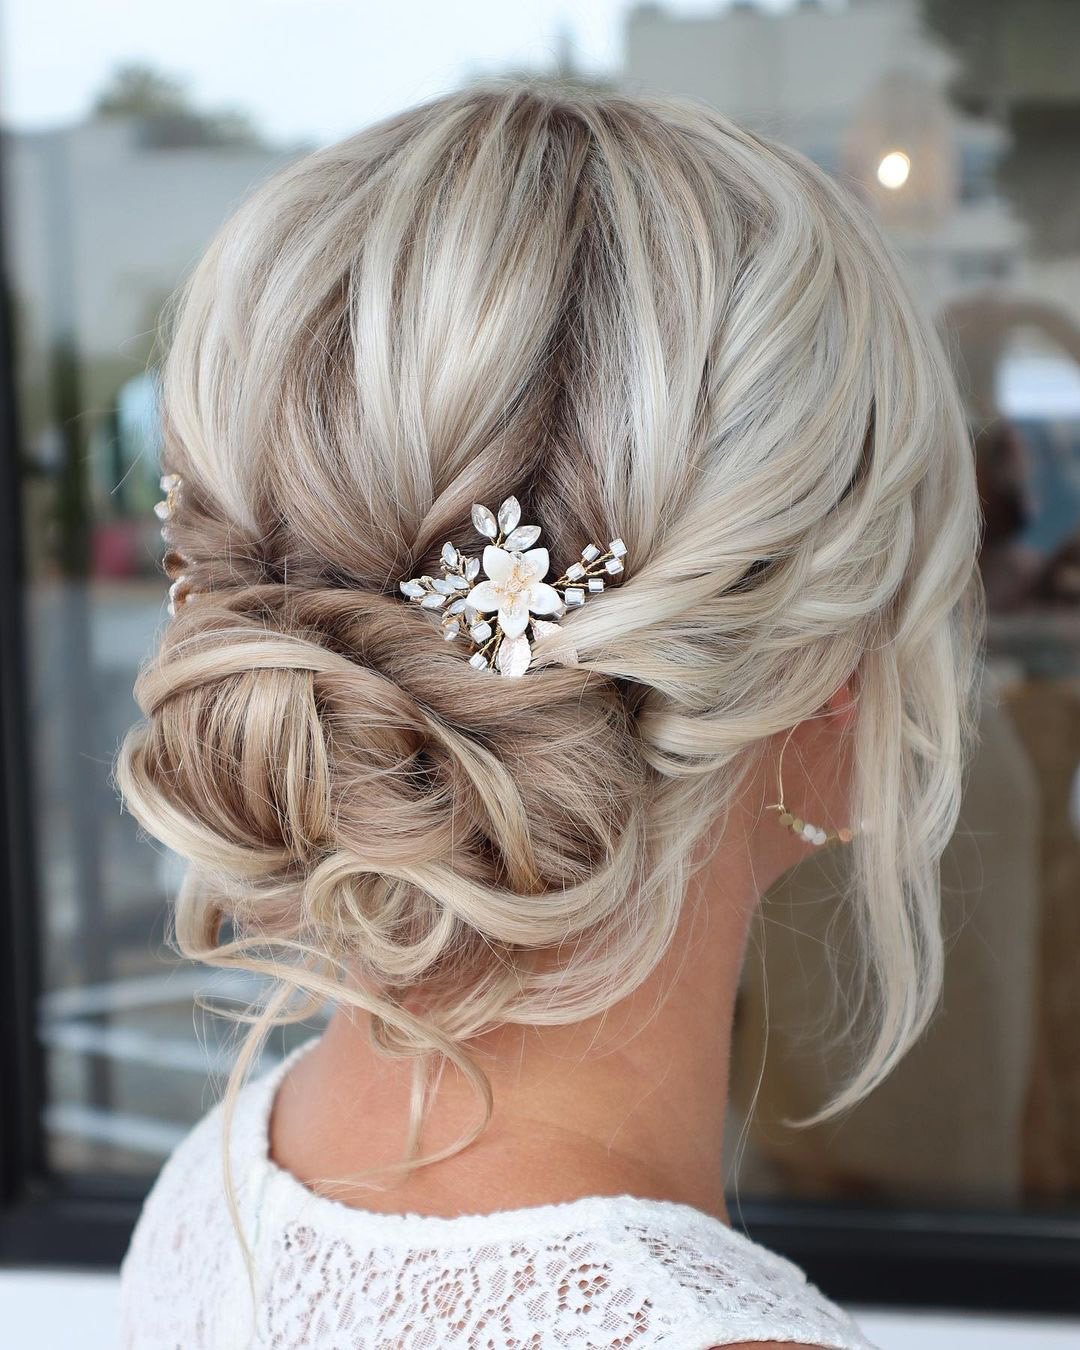 wedding hairstyles for curly hair updo blonde with flower pin reneemarieacademy